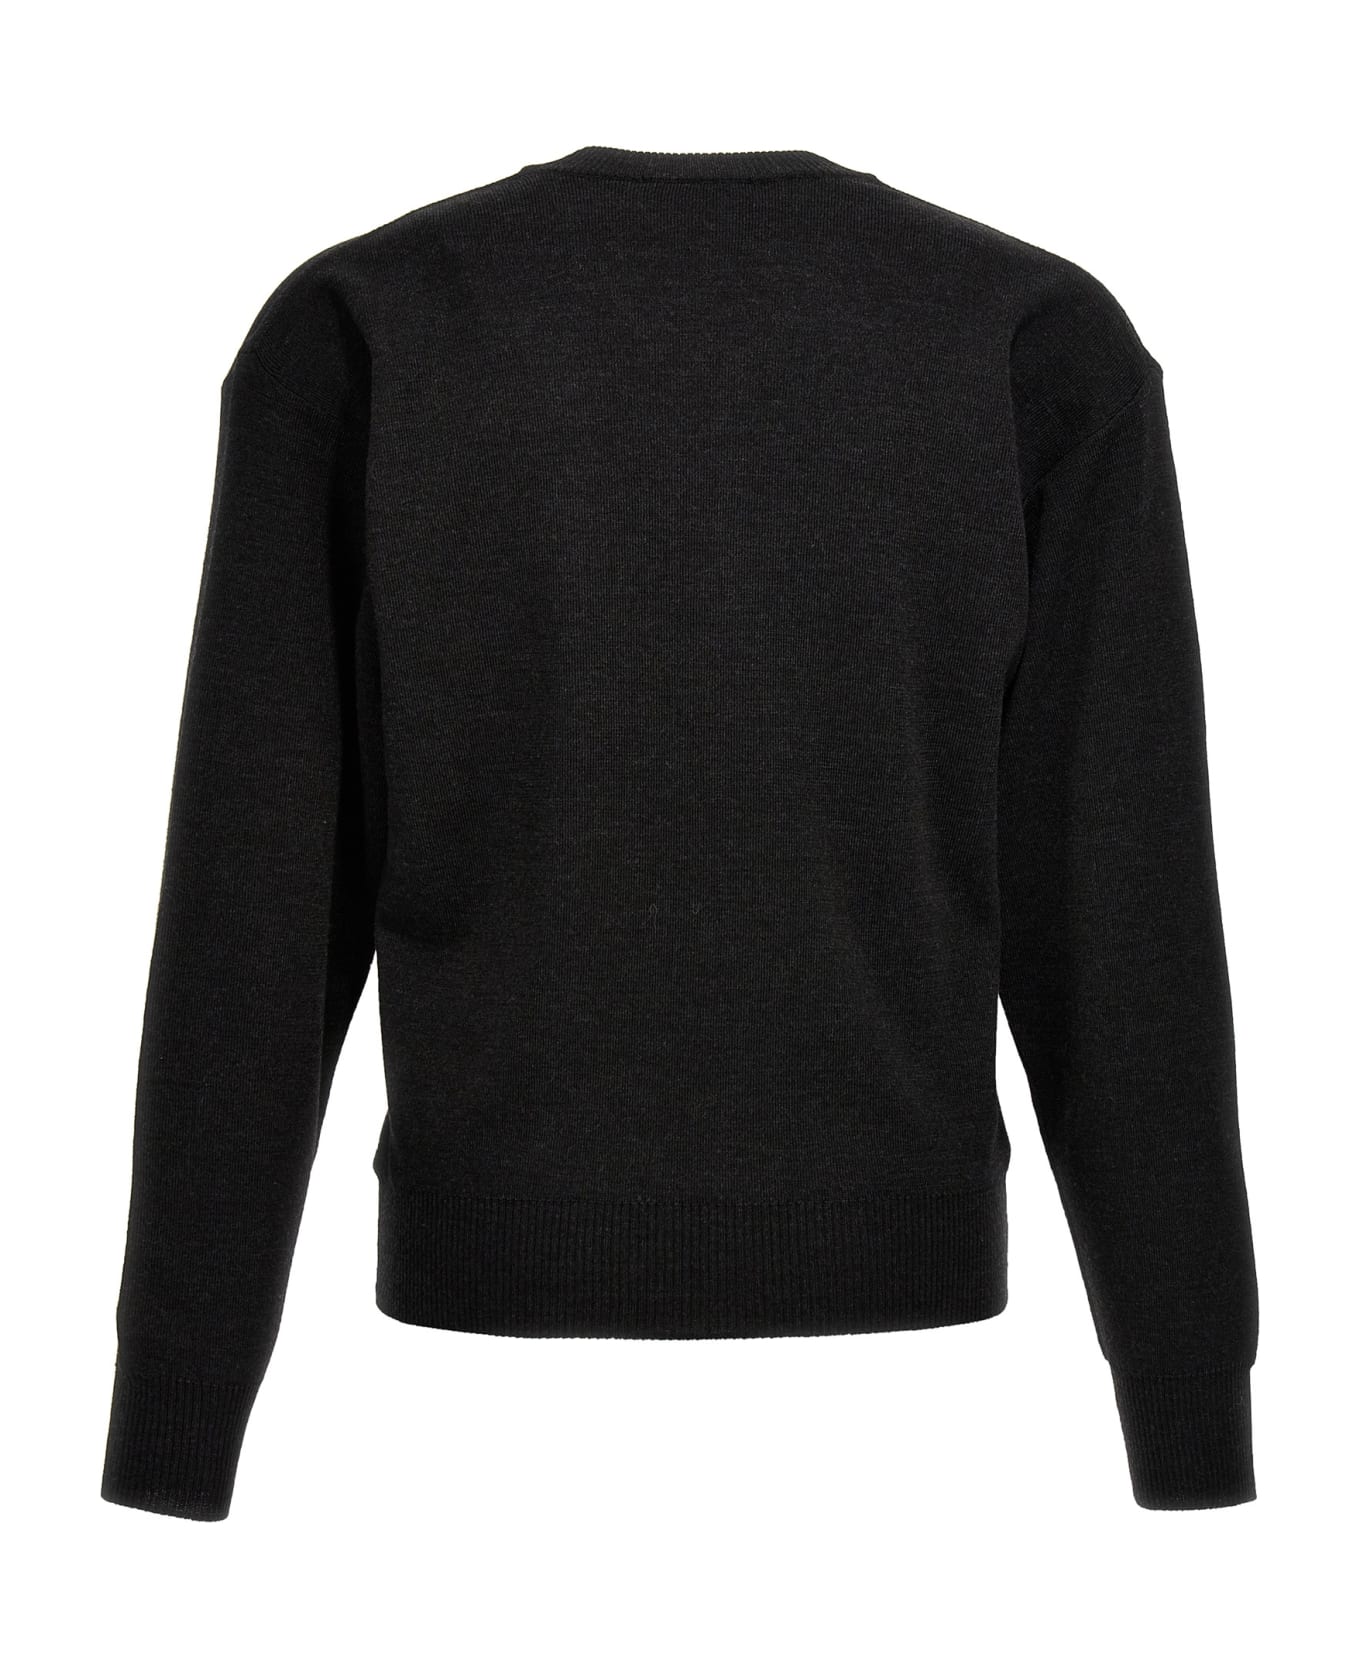 Lemaire V-neck Sweater - Antracite name:475